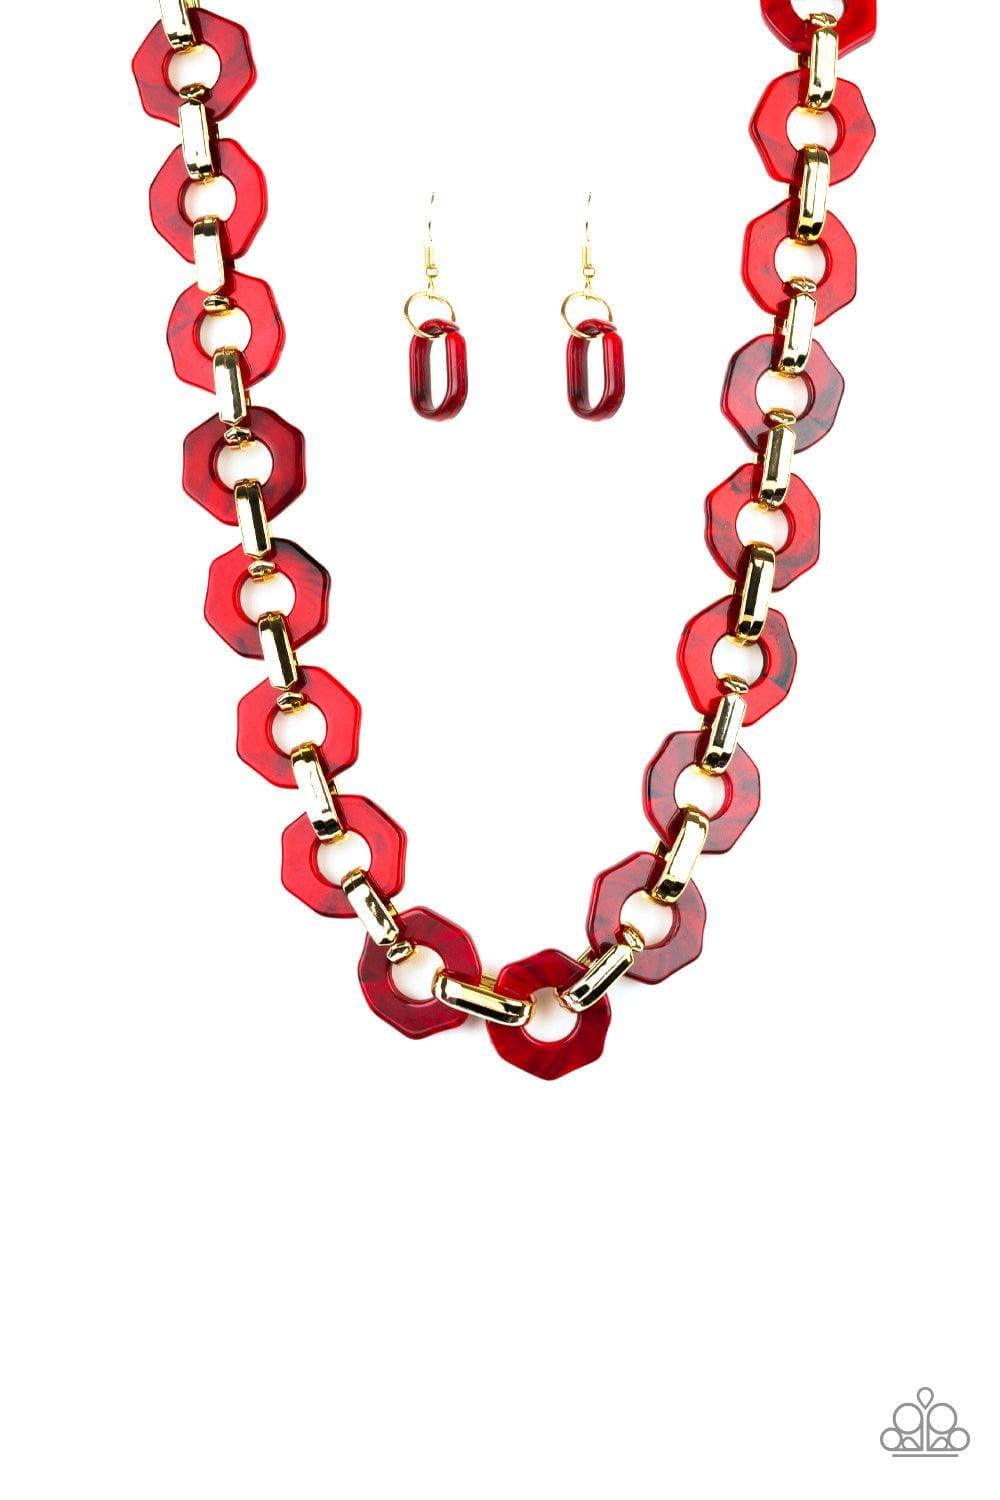 Paparazzi Accessories - Fashionista Fever - Red Necklace - Bling by JessieK